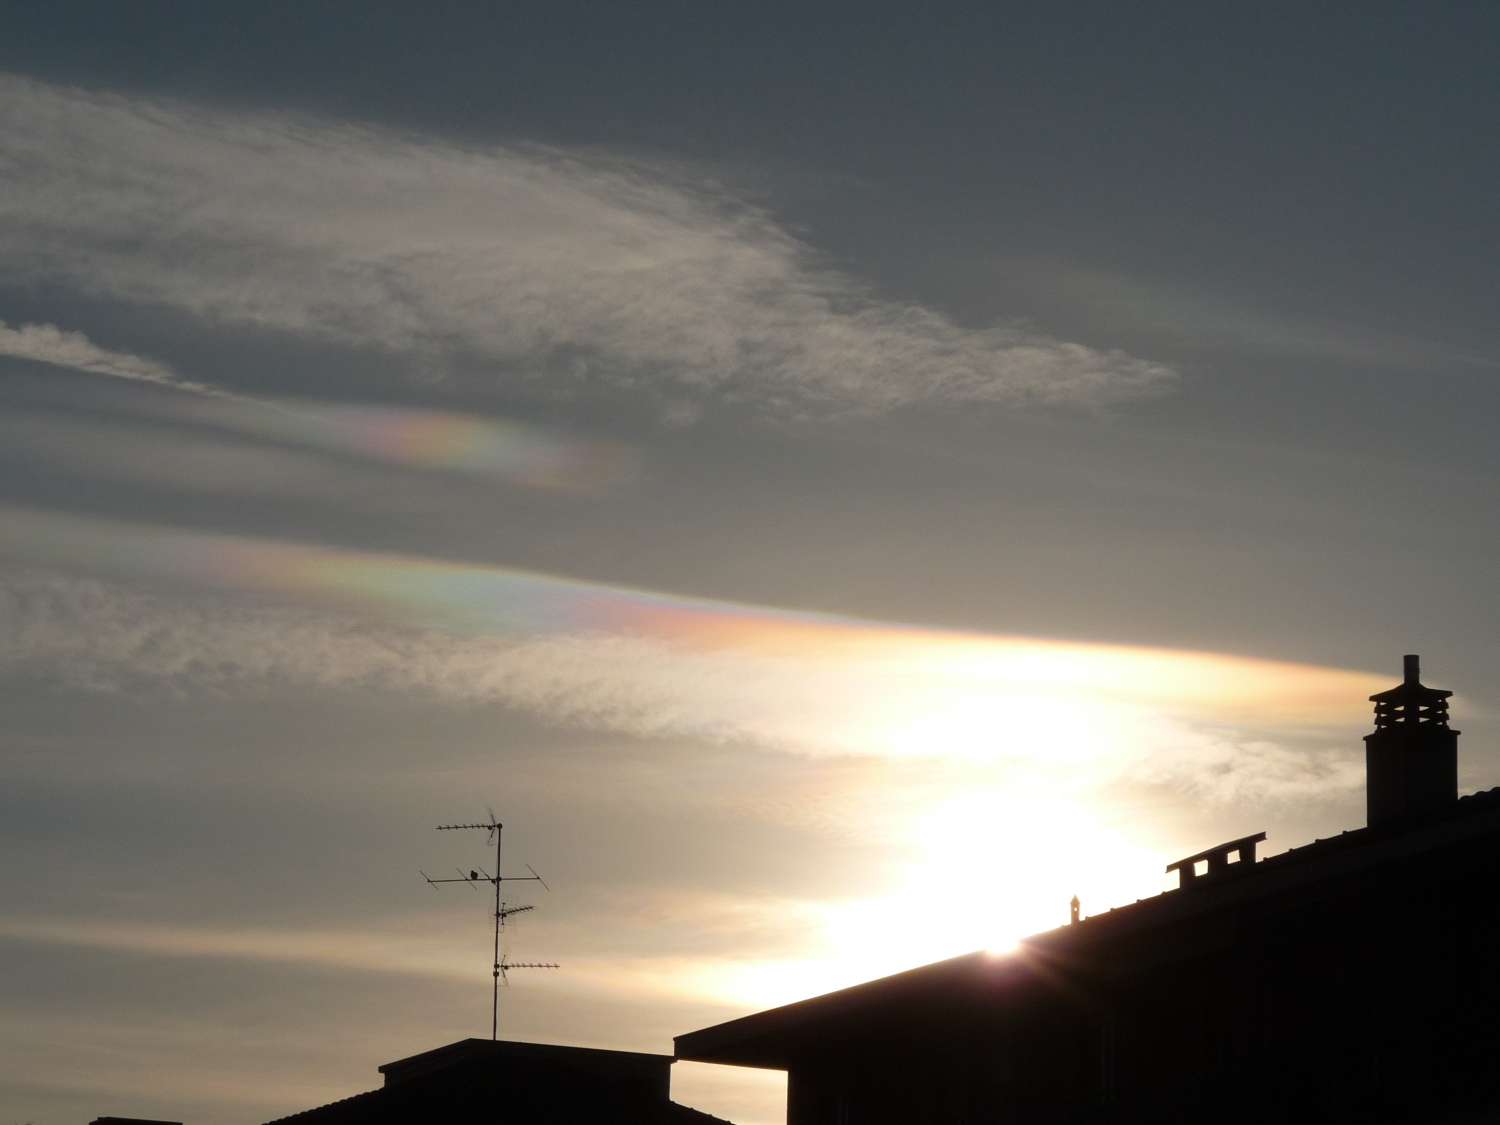 Iridescent clouds: 52 KB; click on the image to enlarge